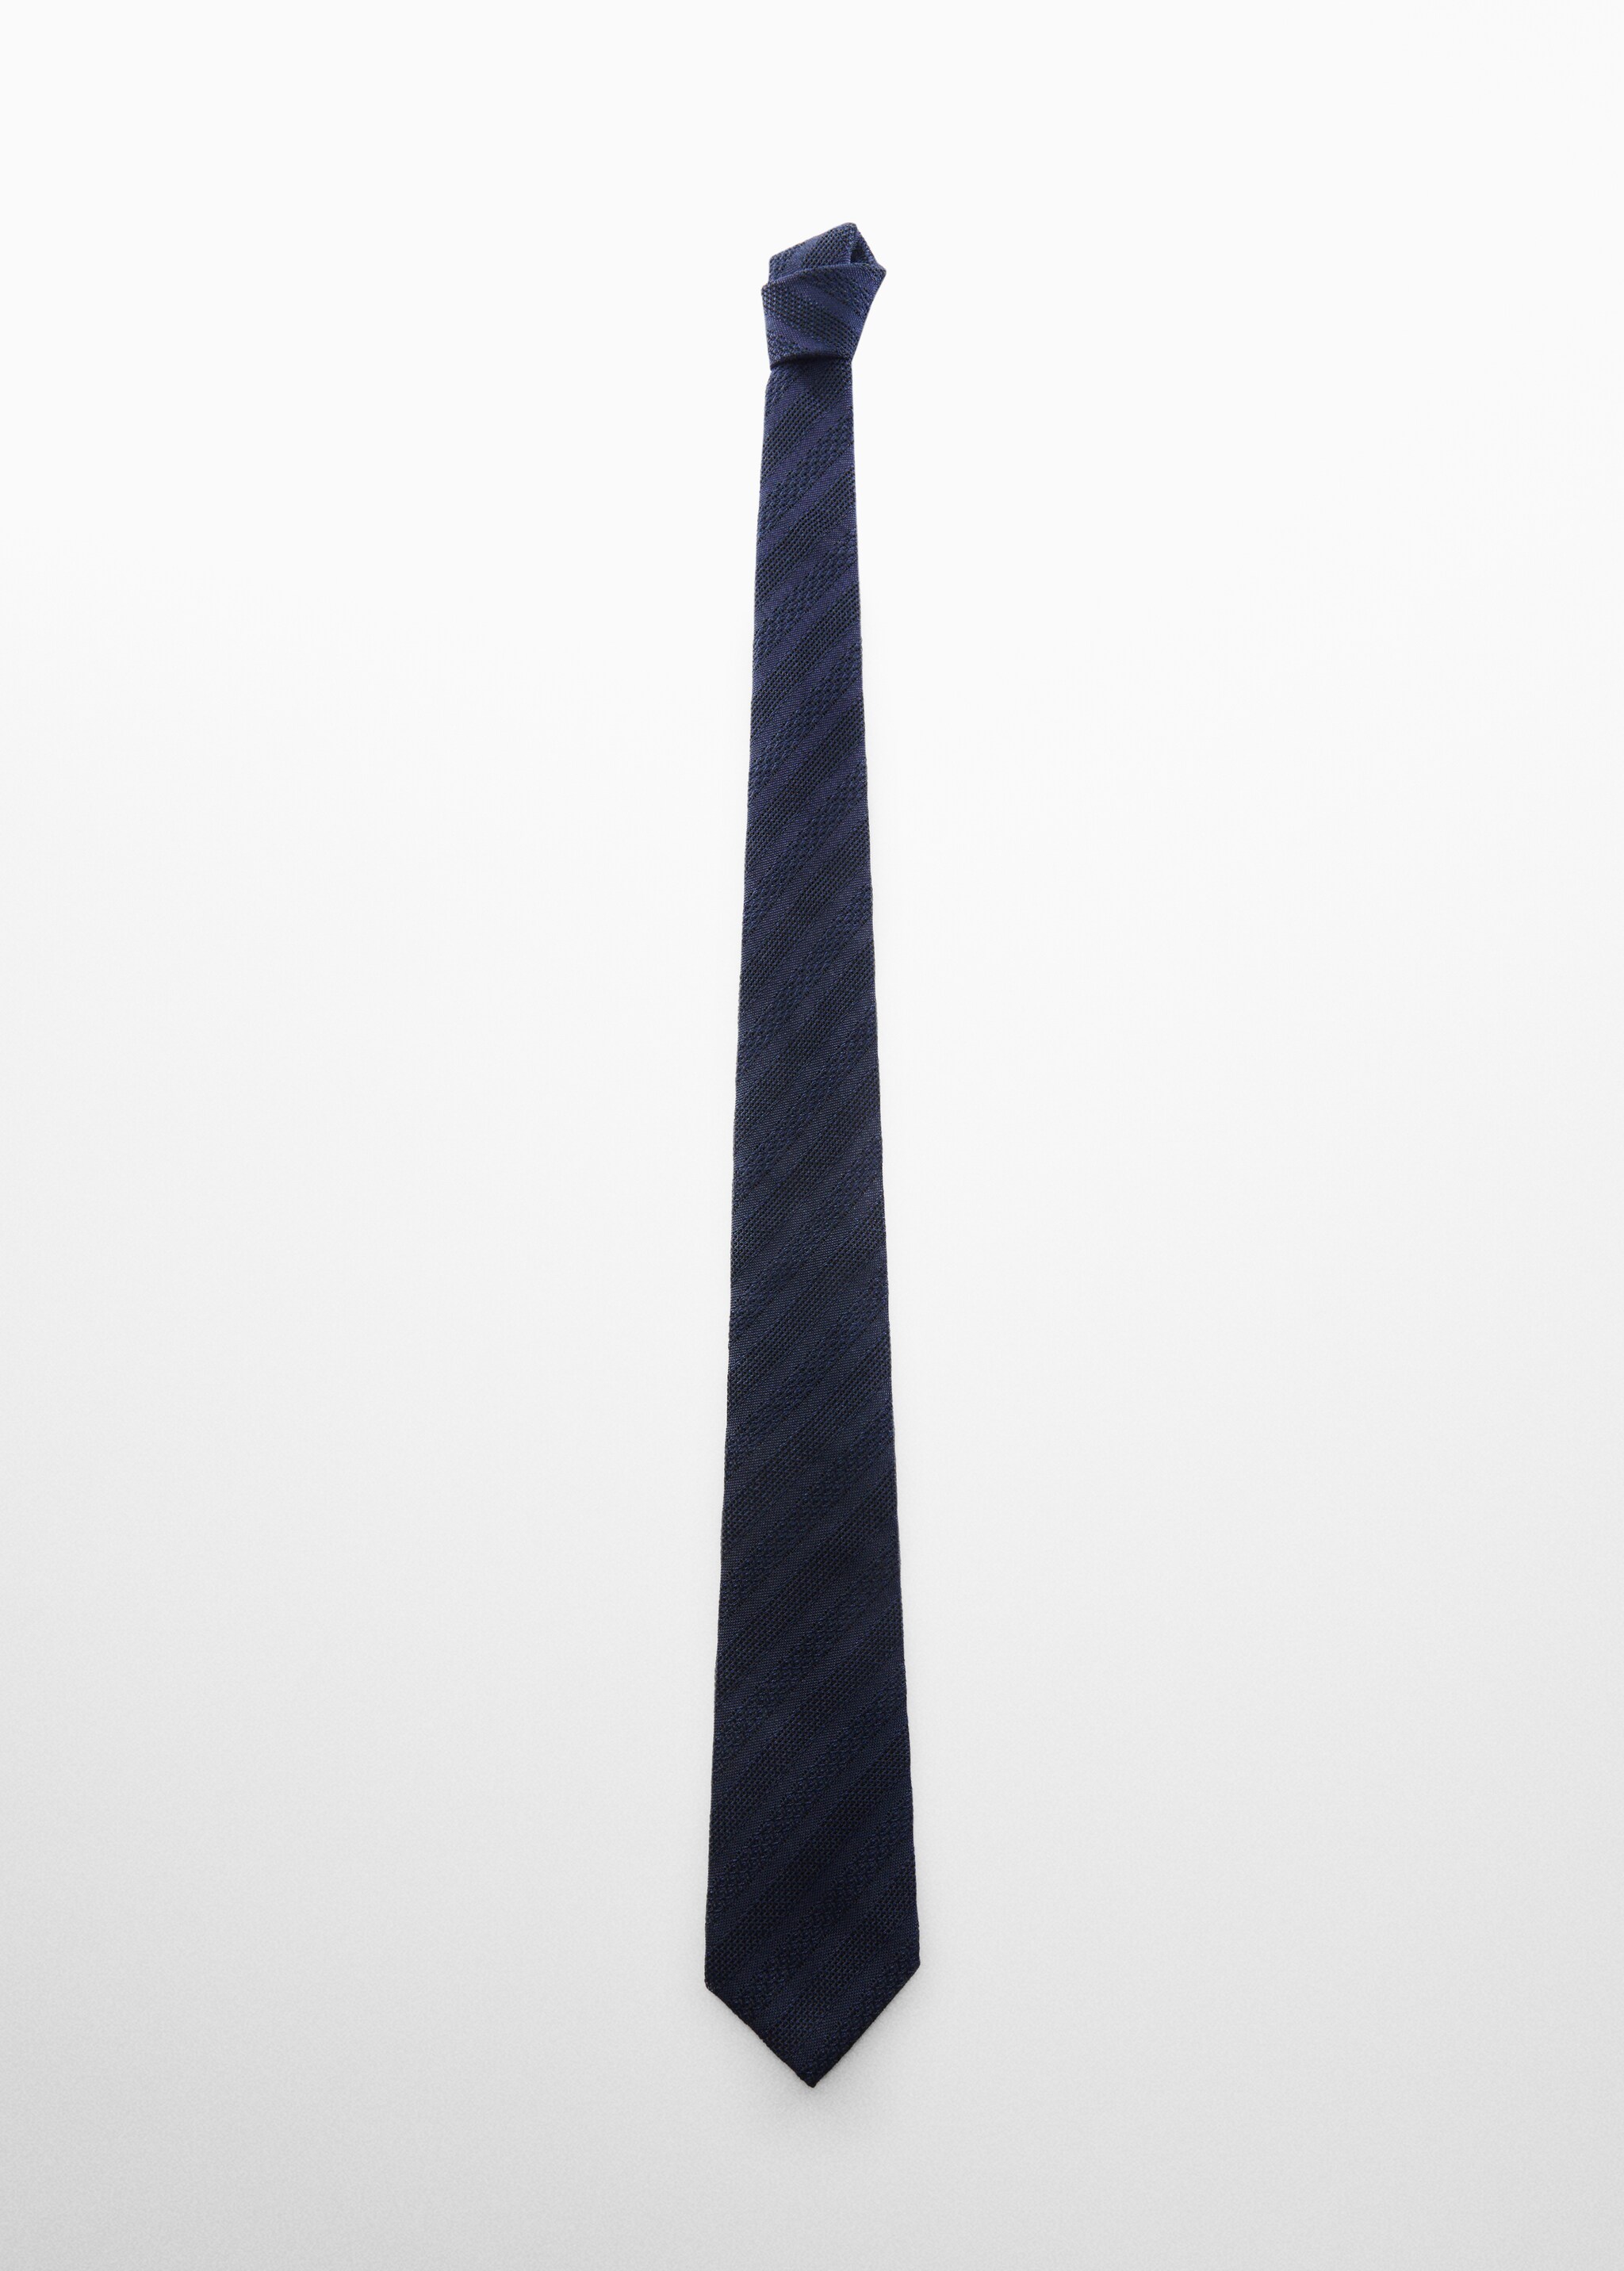 100% structured mulberry silk tie - Article without model